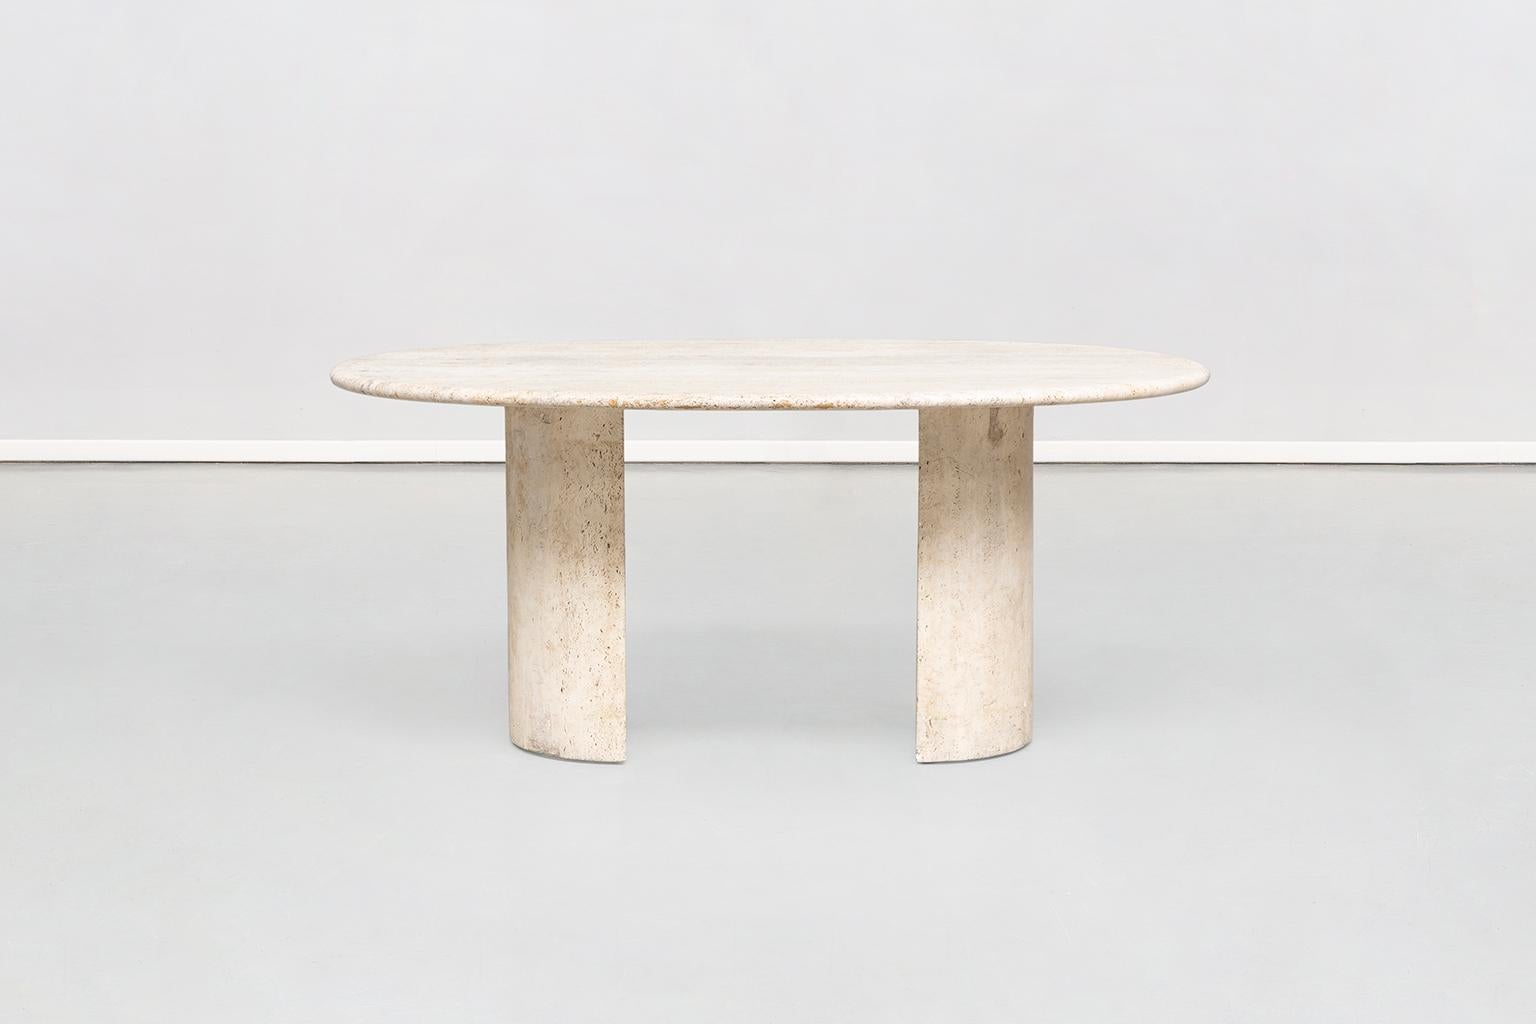 Italian Mid-Century Modern travertine dining table Dolmen by Cappellini, 1970s
Sculptural dining table, Is composed of two twin blocks where a third and unique piece that is the top stays on, with all the three pieces in travertine marble.
This